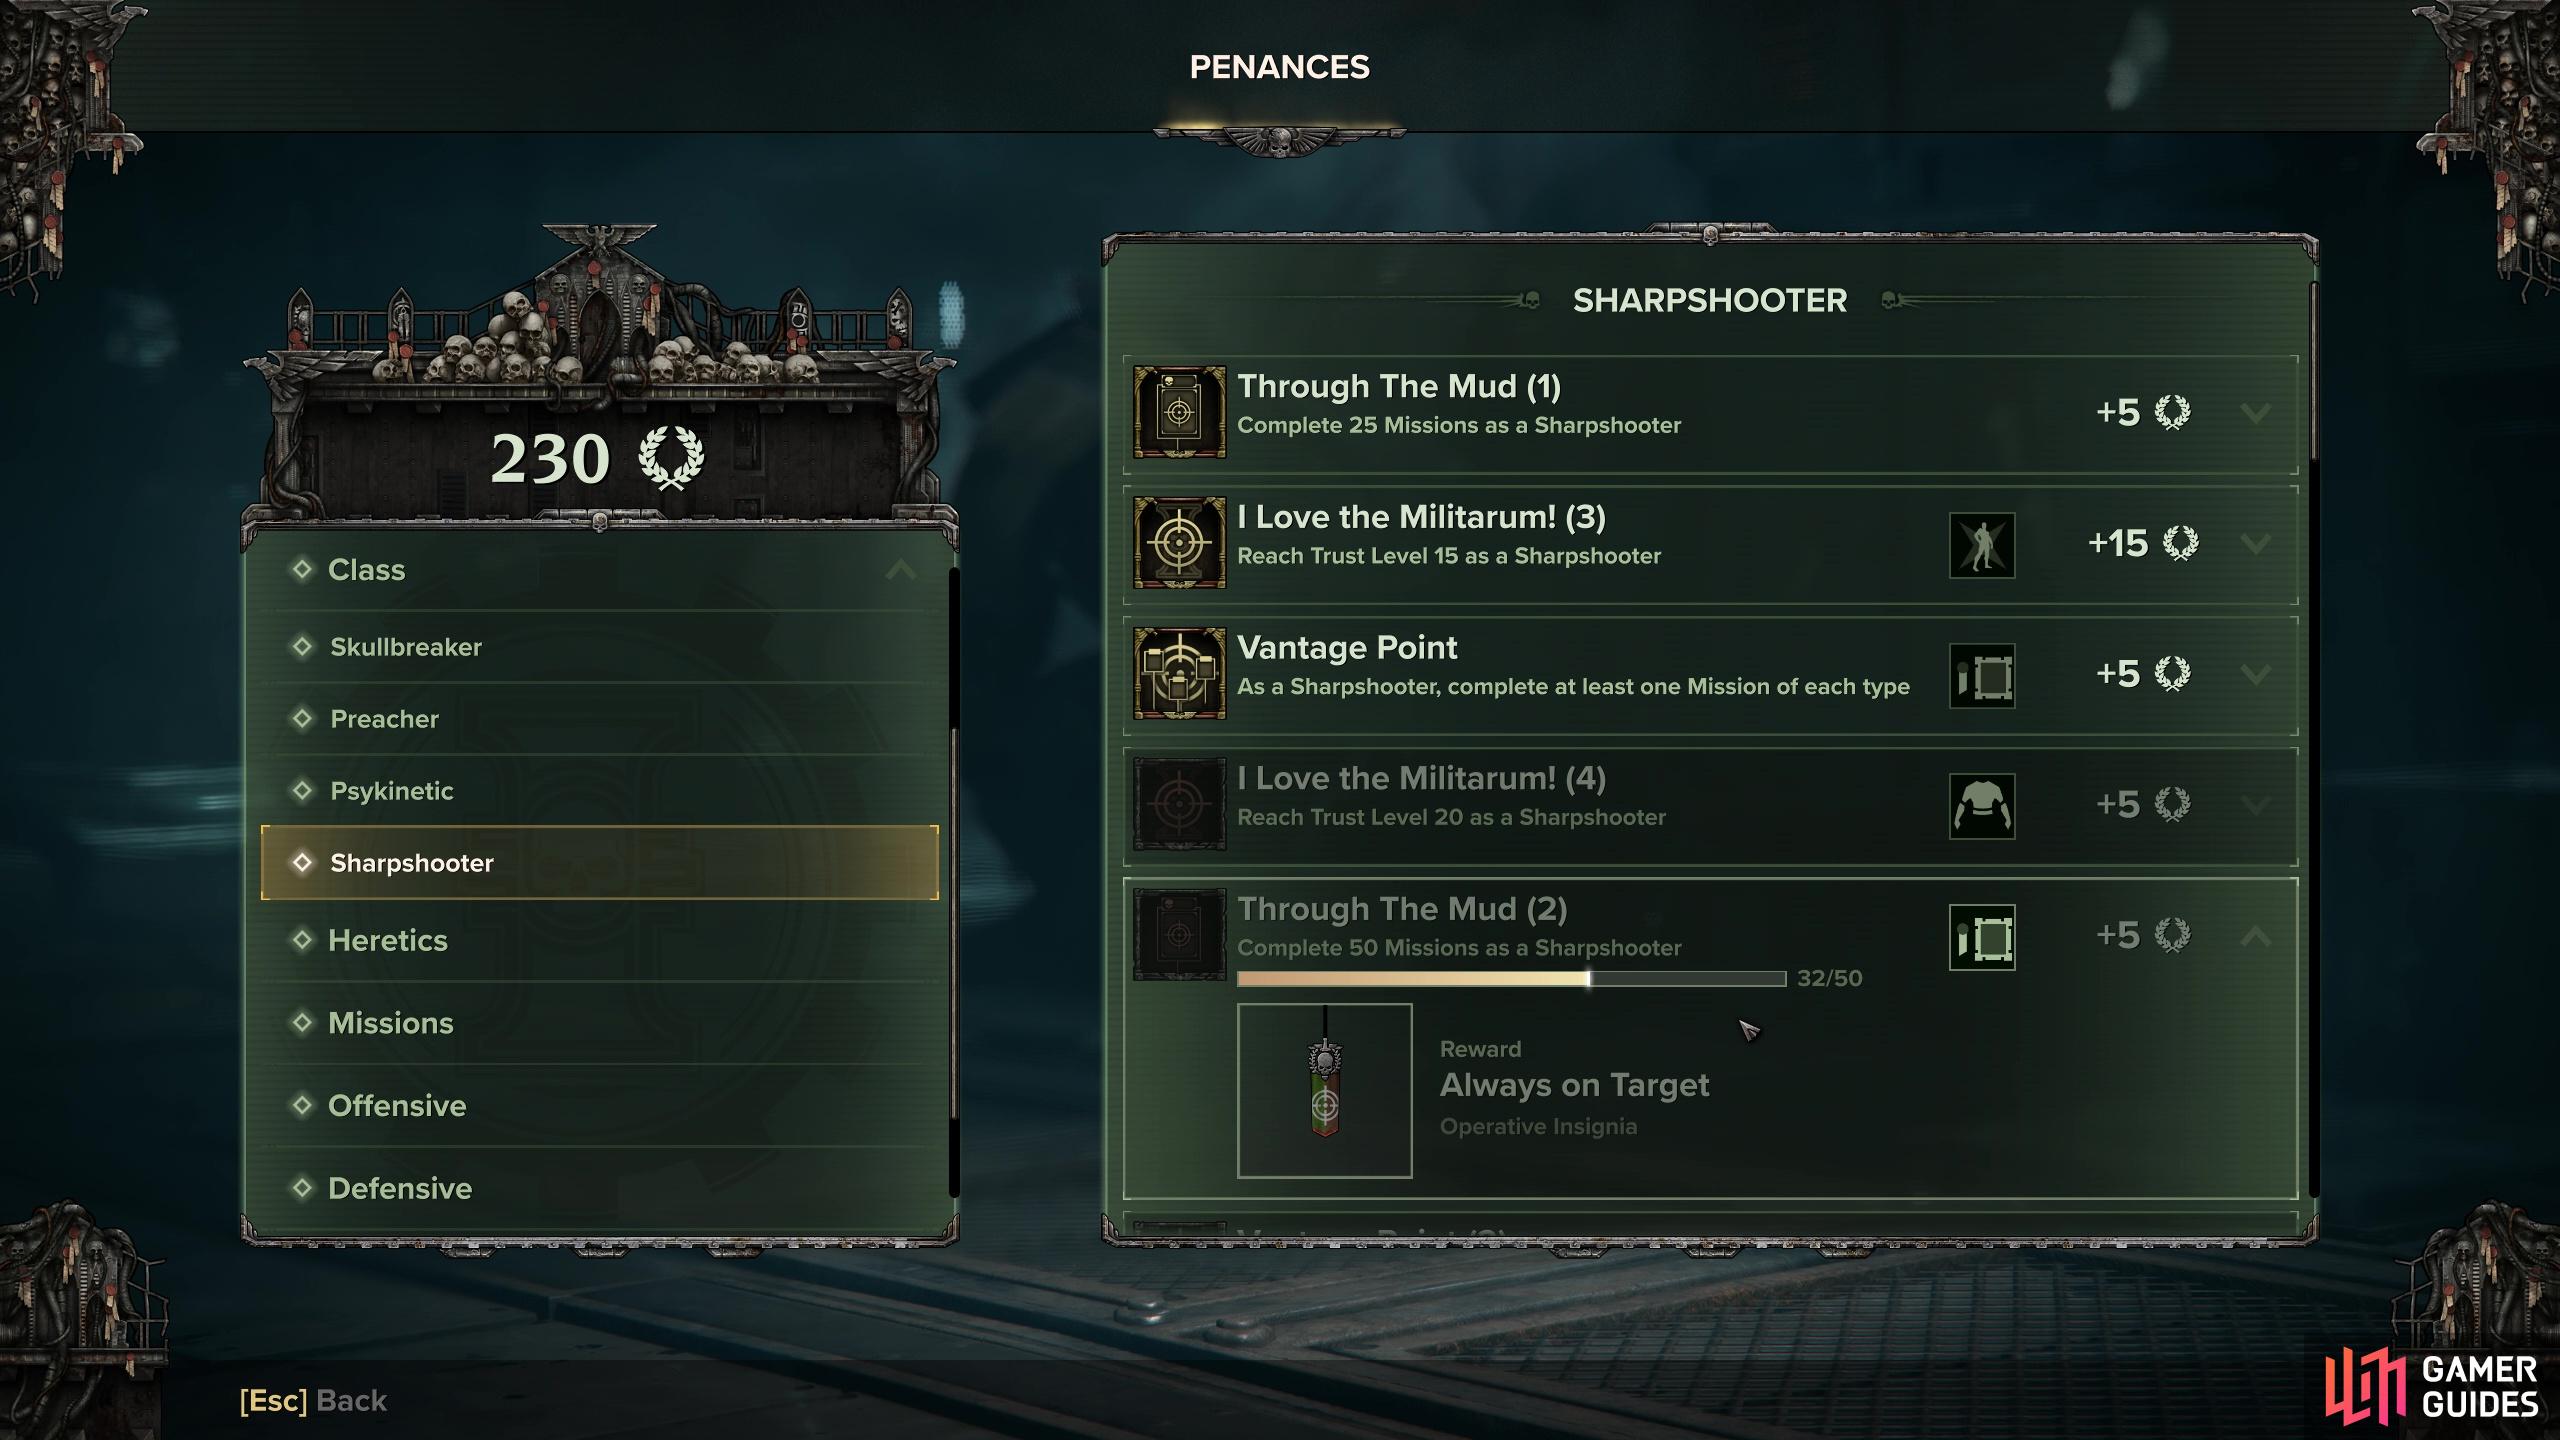 By clicking on certain Penances you can review the rewards in more detail.